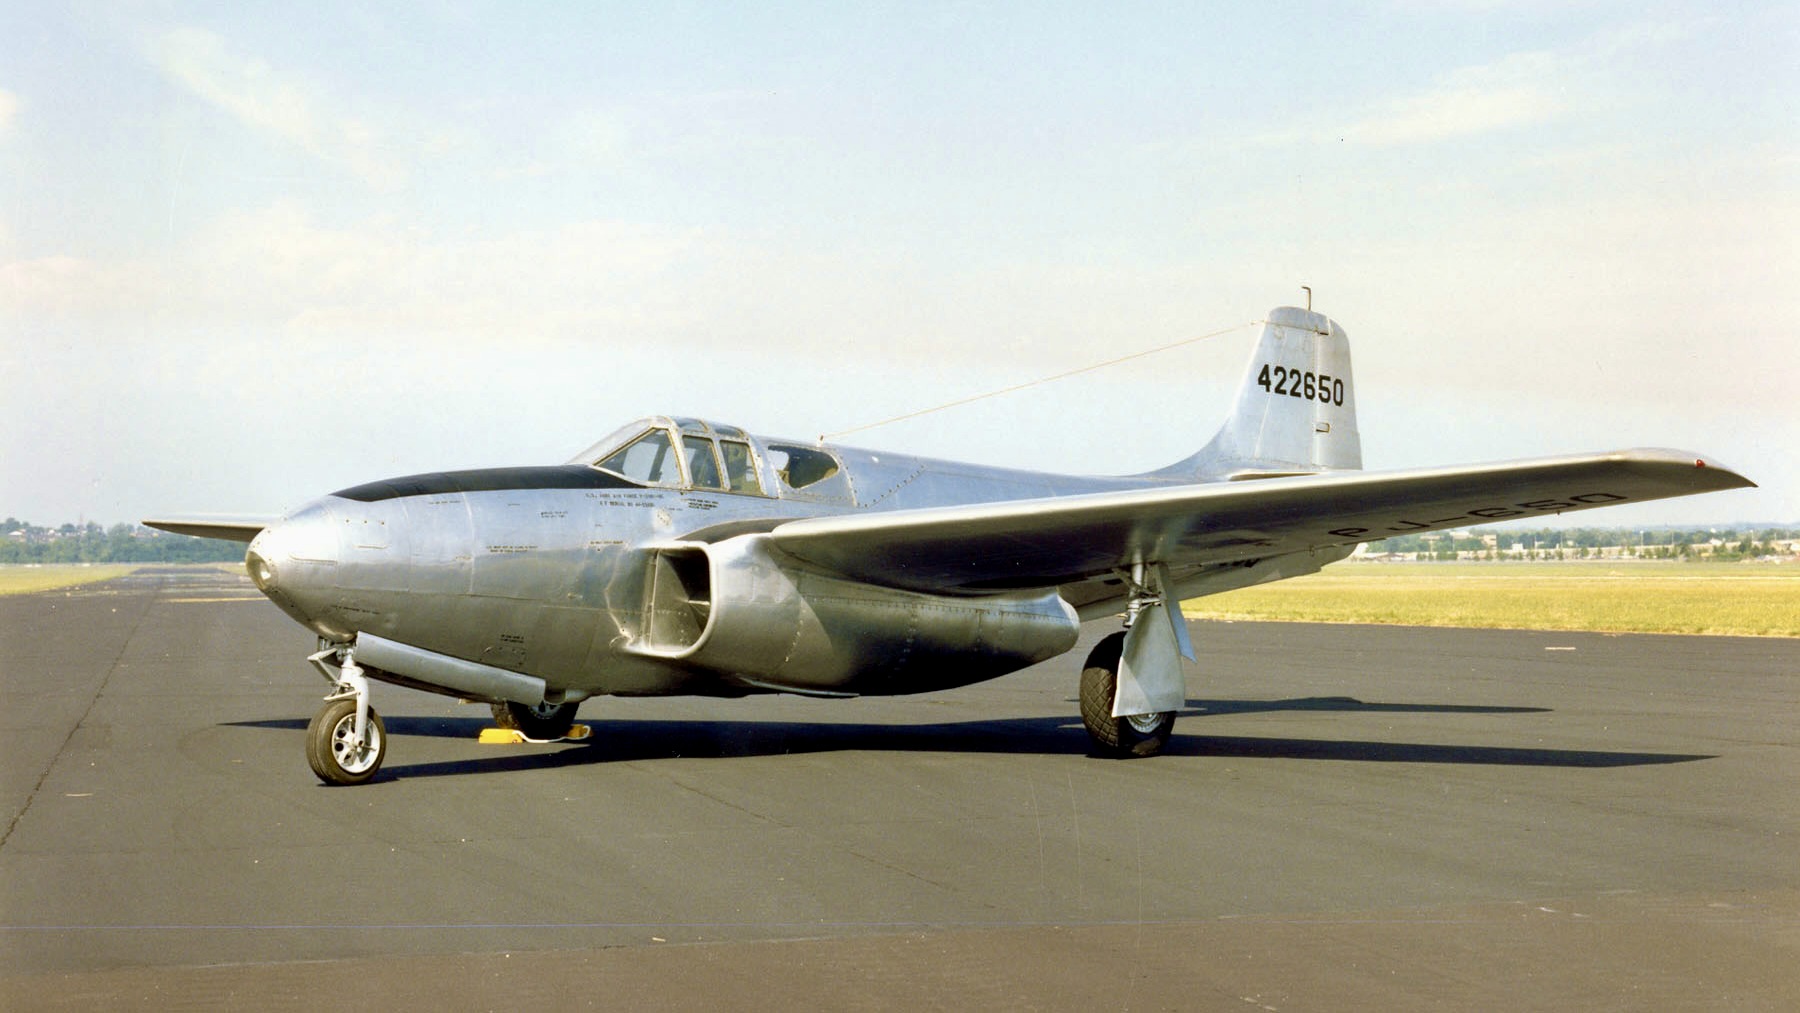 DAYTON, Ohio -- Bell P-59B Airacomet at the National Museum of the United States Air Force. (U.S. Air Force photo)